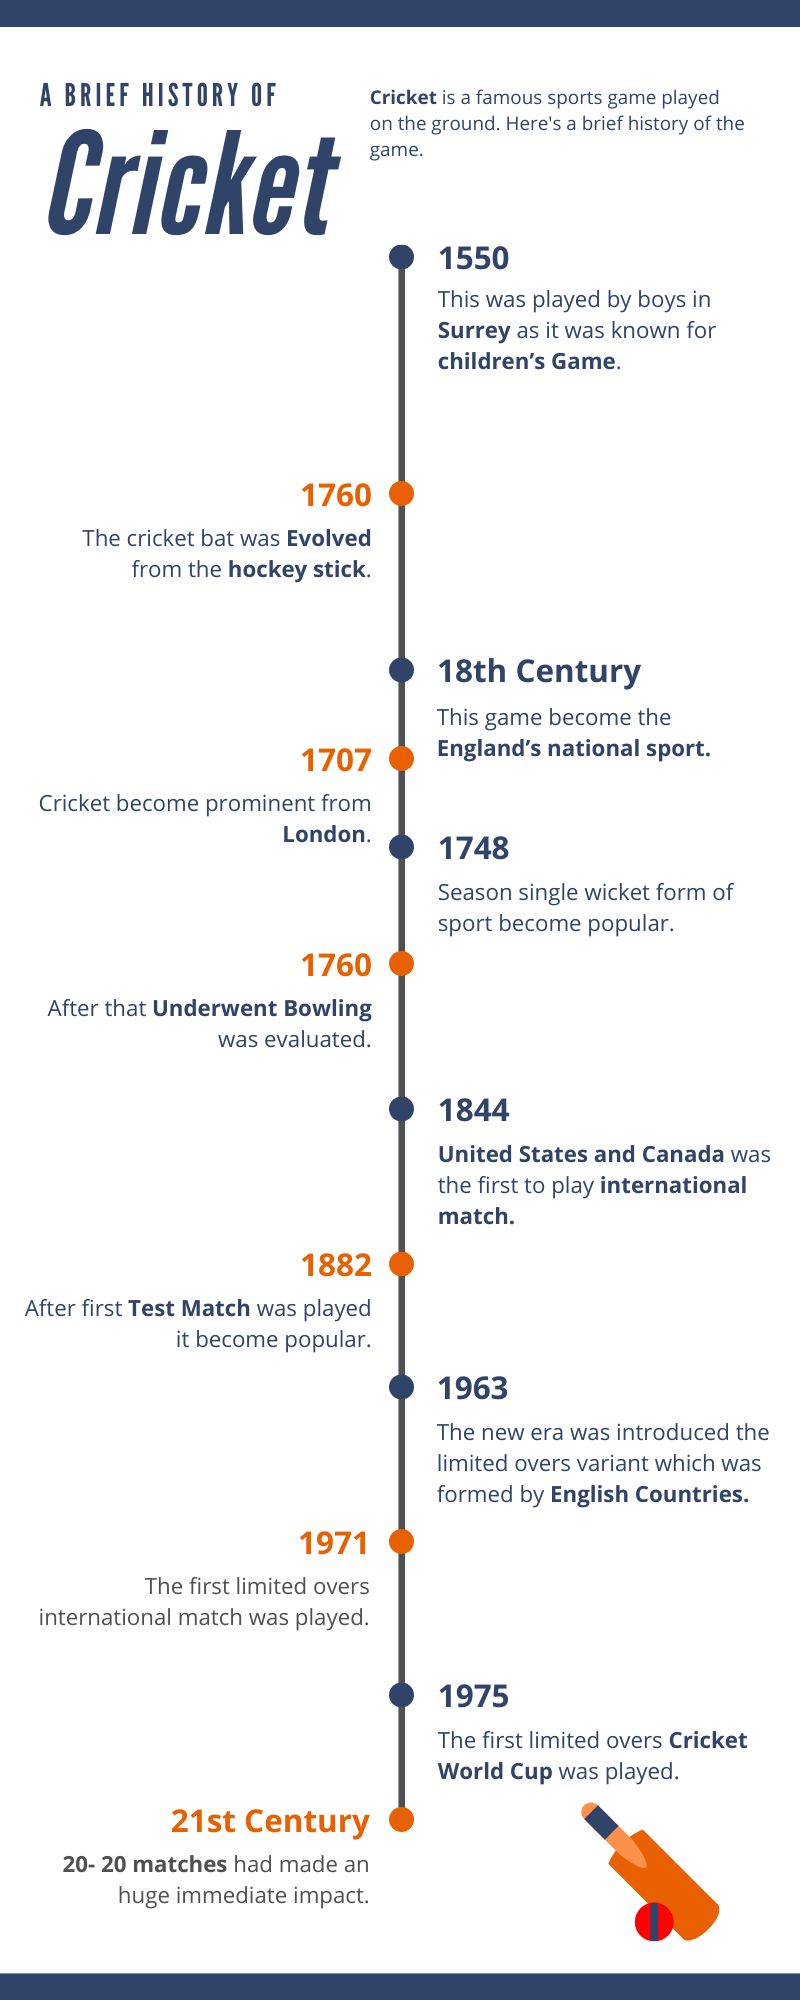 The Brief History of Cricket